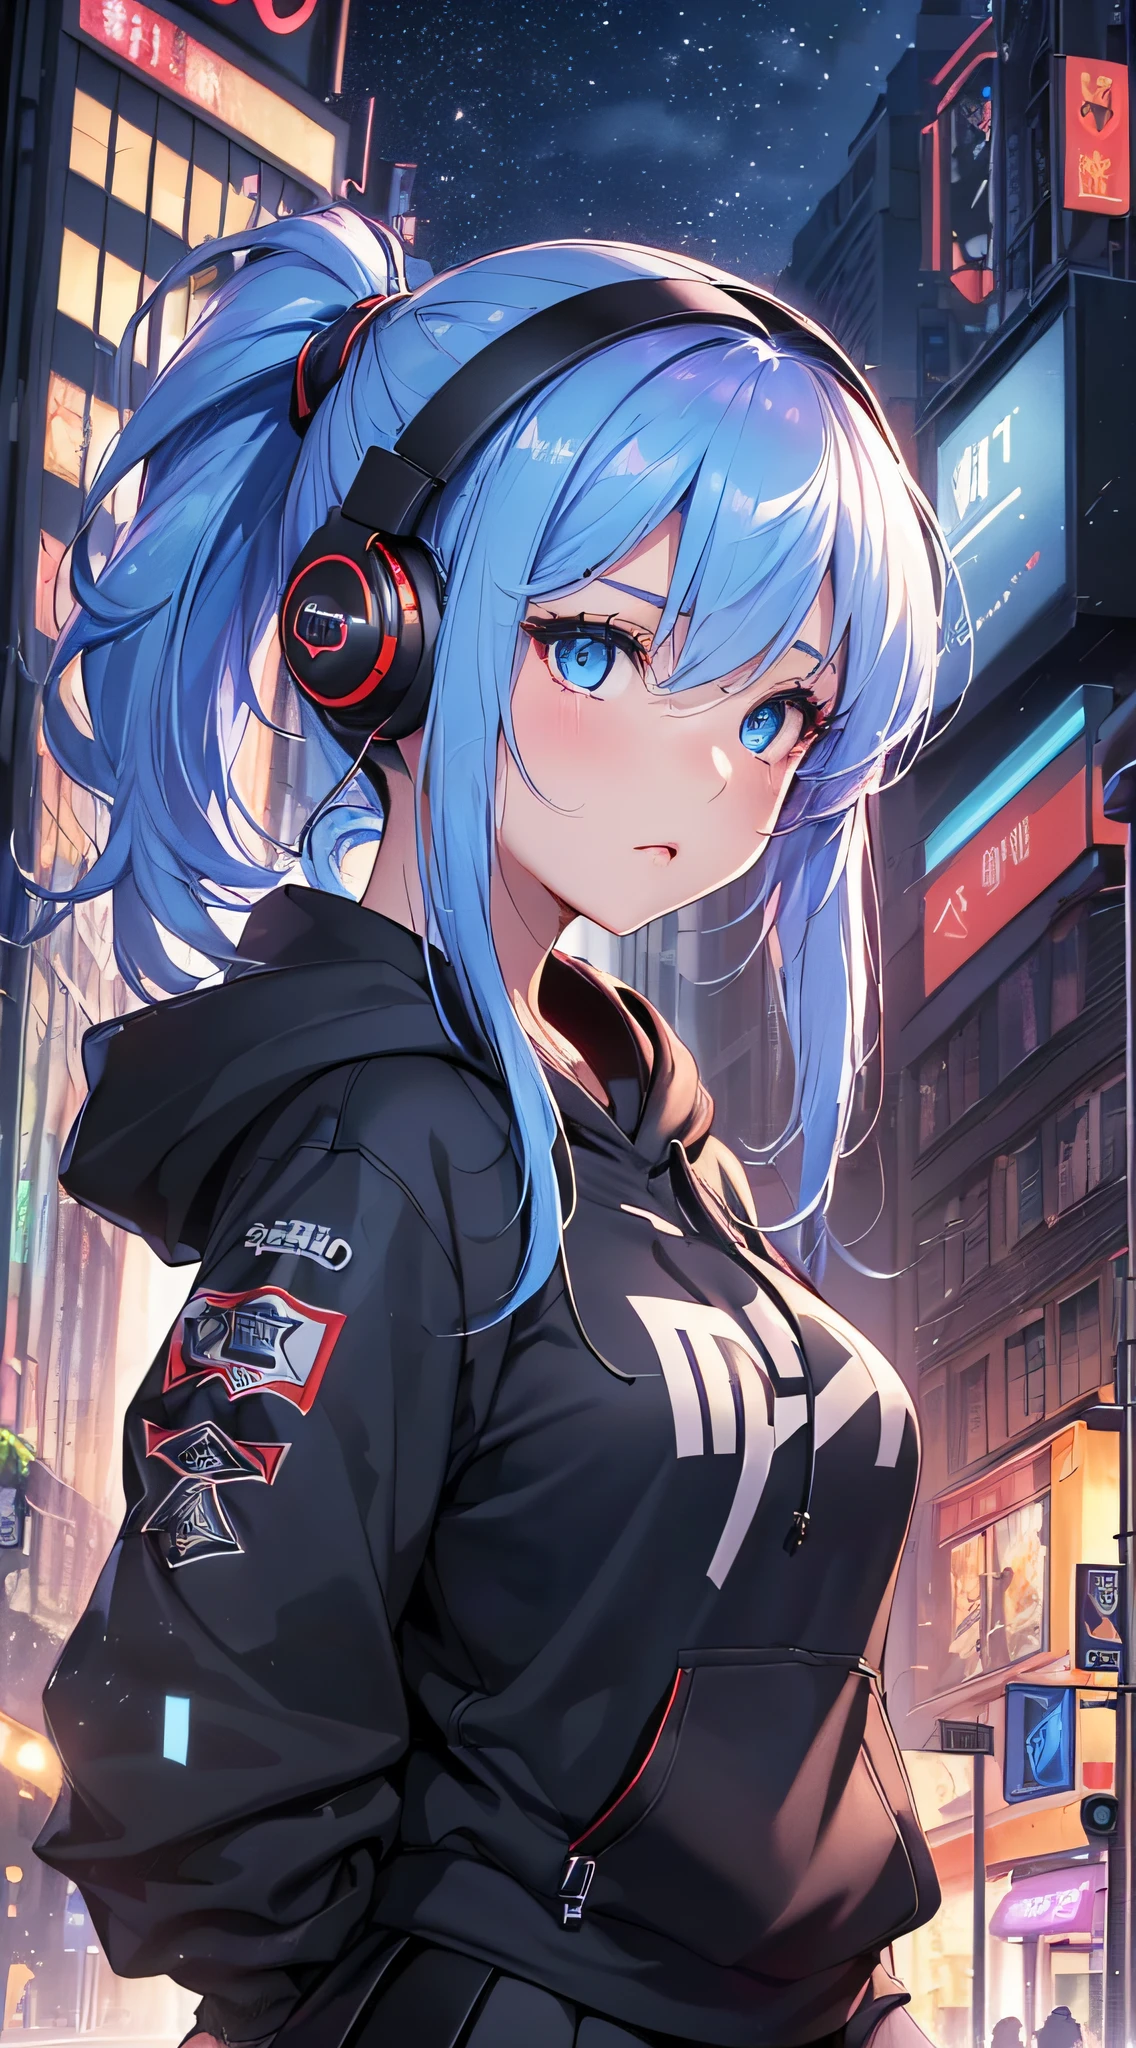 top-quality、Top image quality、​masterpiece、girl with((18year old、Best Bust、big bast,Beautiful blue eyes、Breasts wide open, Blue ponytail、A slender、Large valleys、Reflecting the whole body、Red face、Shining eyes、Headphones on the head,Black hoodie、Black short skirt、head phone、Have a smartphone、Fly the drone)）hiquality、Beautiful Art、Background with((A city that shines at night、Downtown、Giant monitor、Multiple Laser Pointasutepiece、visualart、depth of fields、